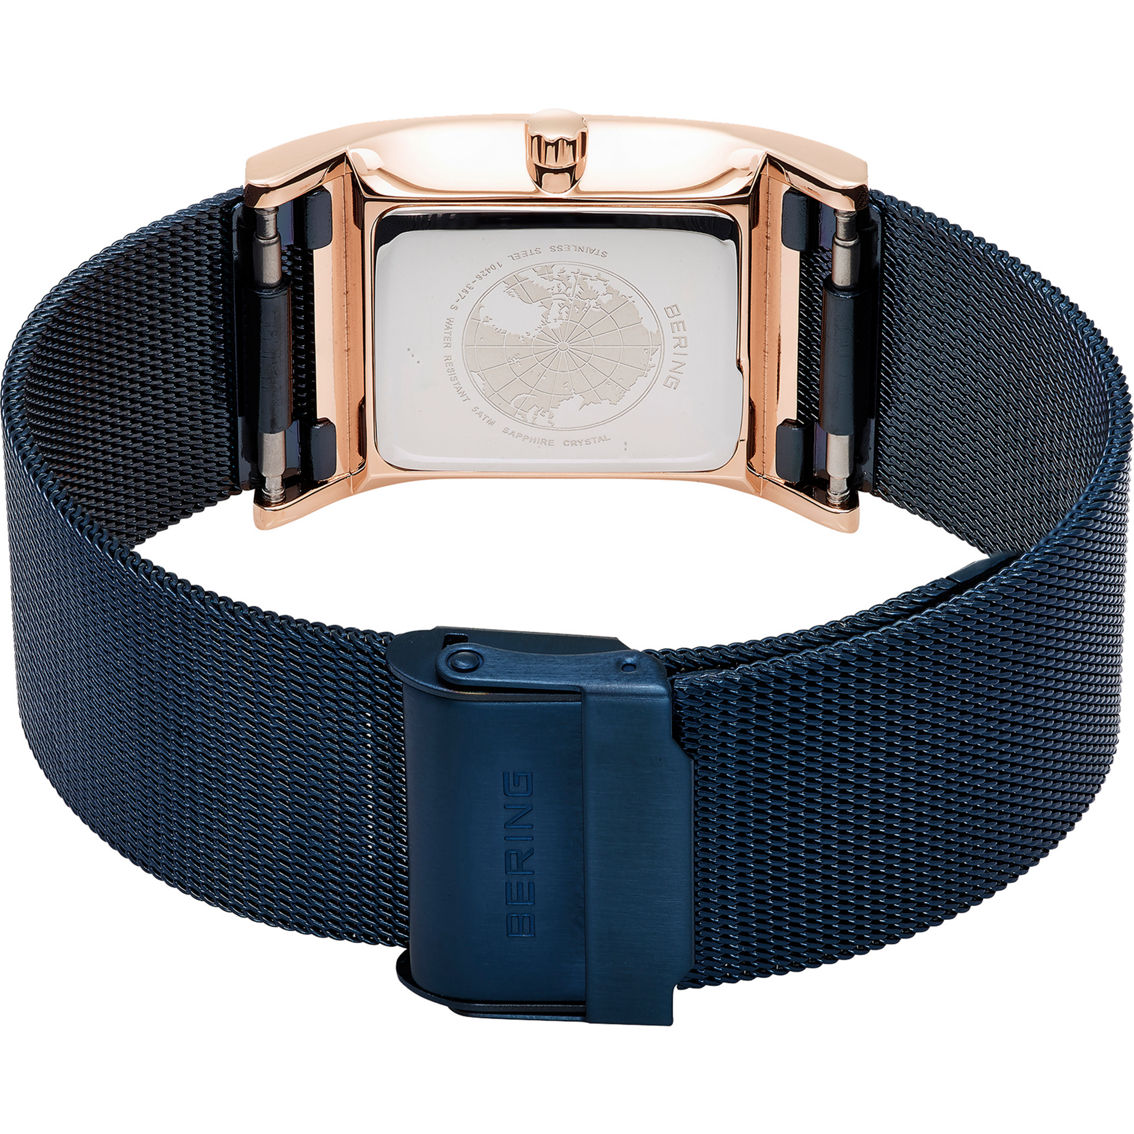 Bering Women's Classic Rose Gold Tank case and Blue Mesh Watch 10426-367-S - Image 2 of 3